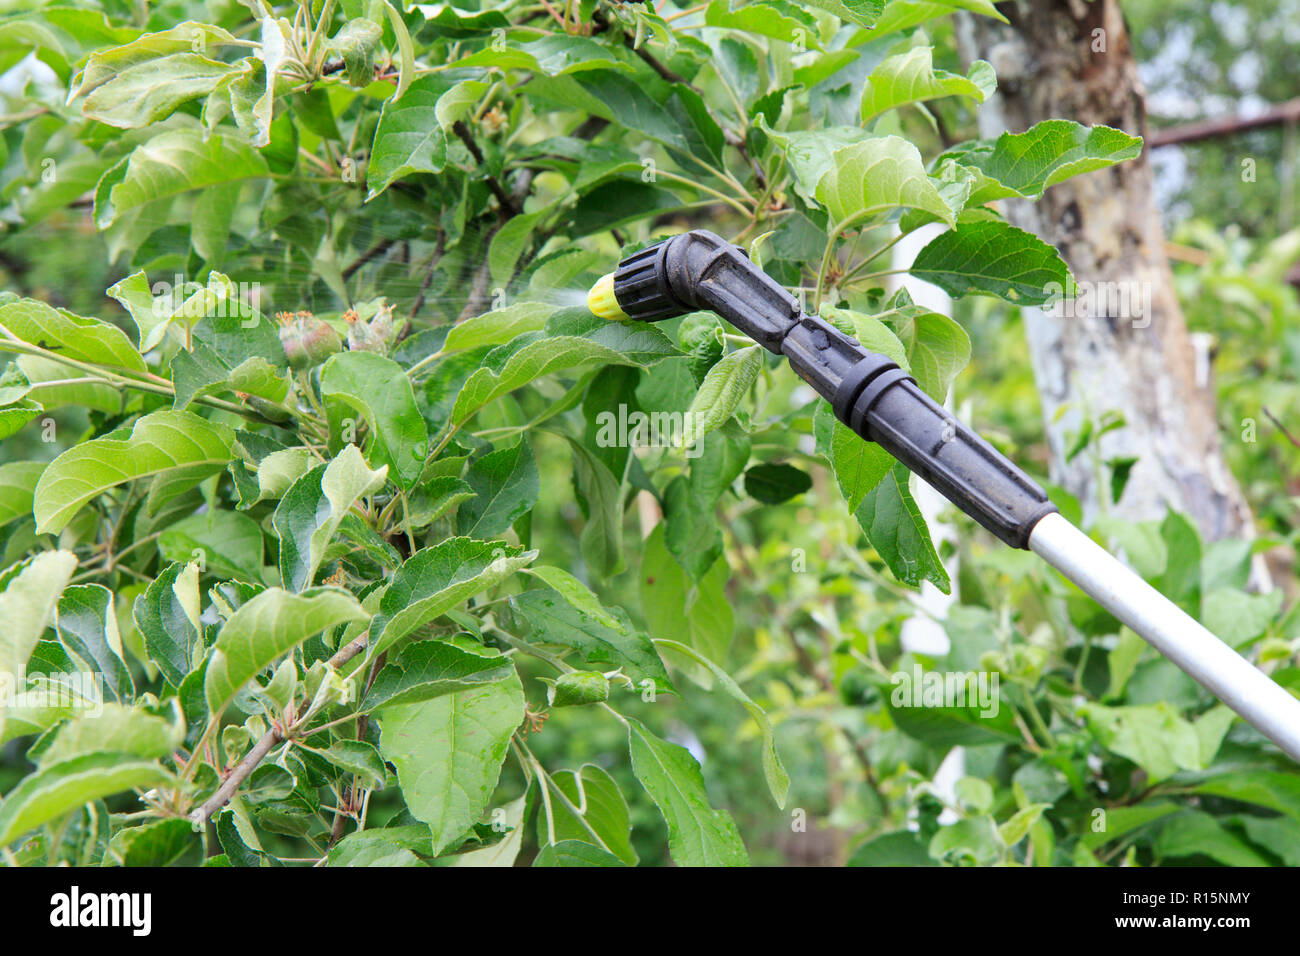 Protecting young apple tree and ripening fruits from fungal disease or vermin with pressure sprayer in spring and summer time Stock Photo